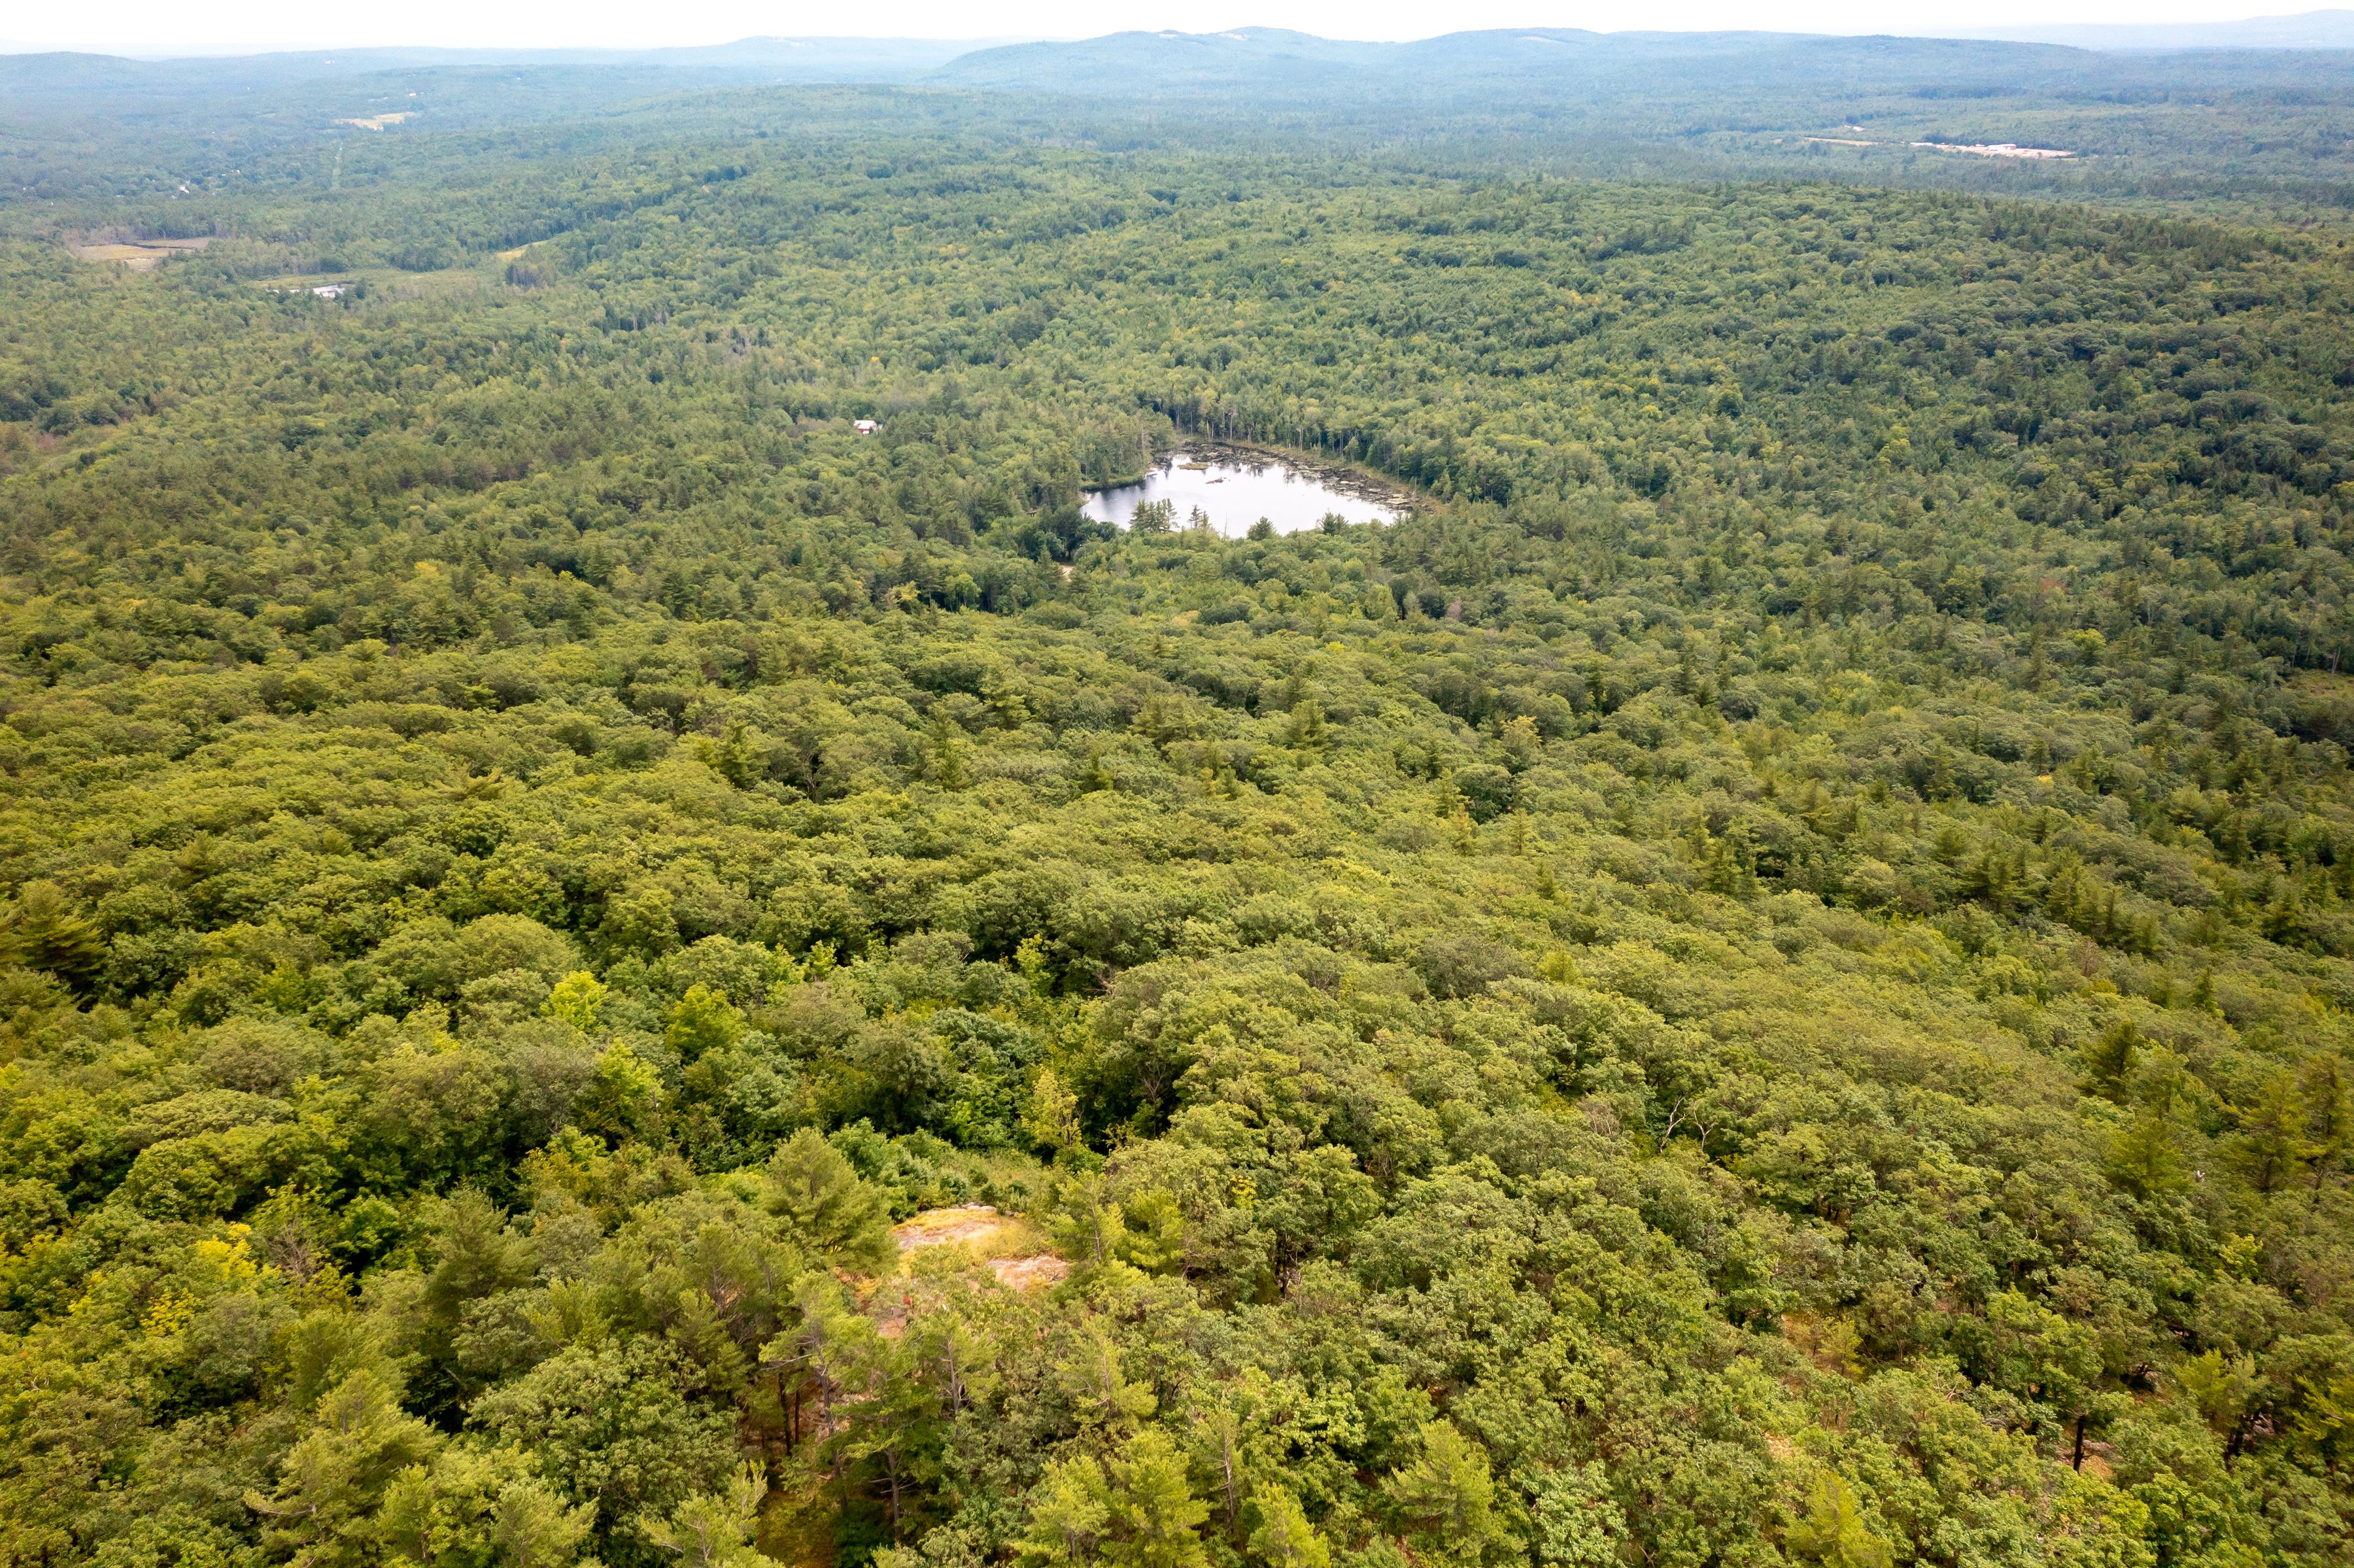 A bird's-eye view of the property from above.